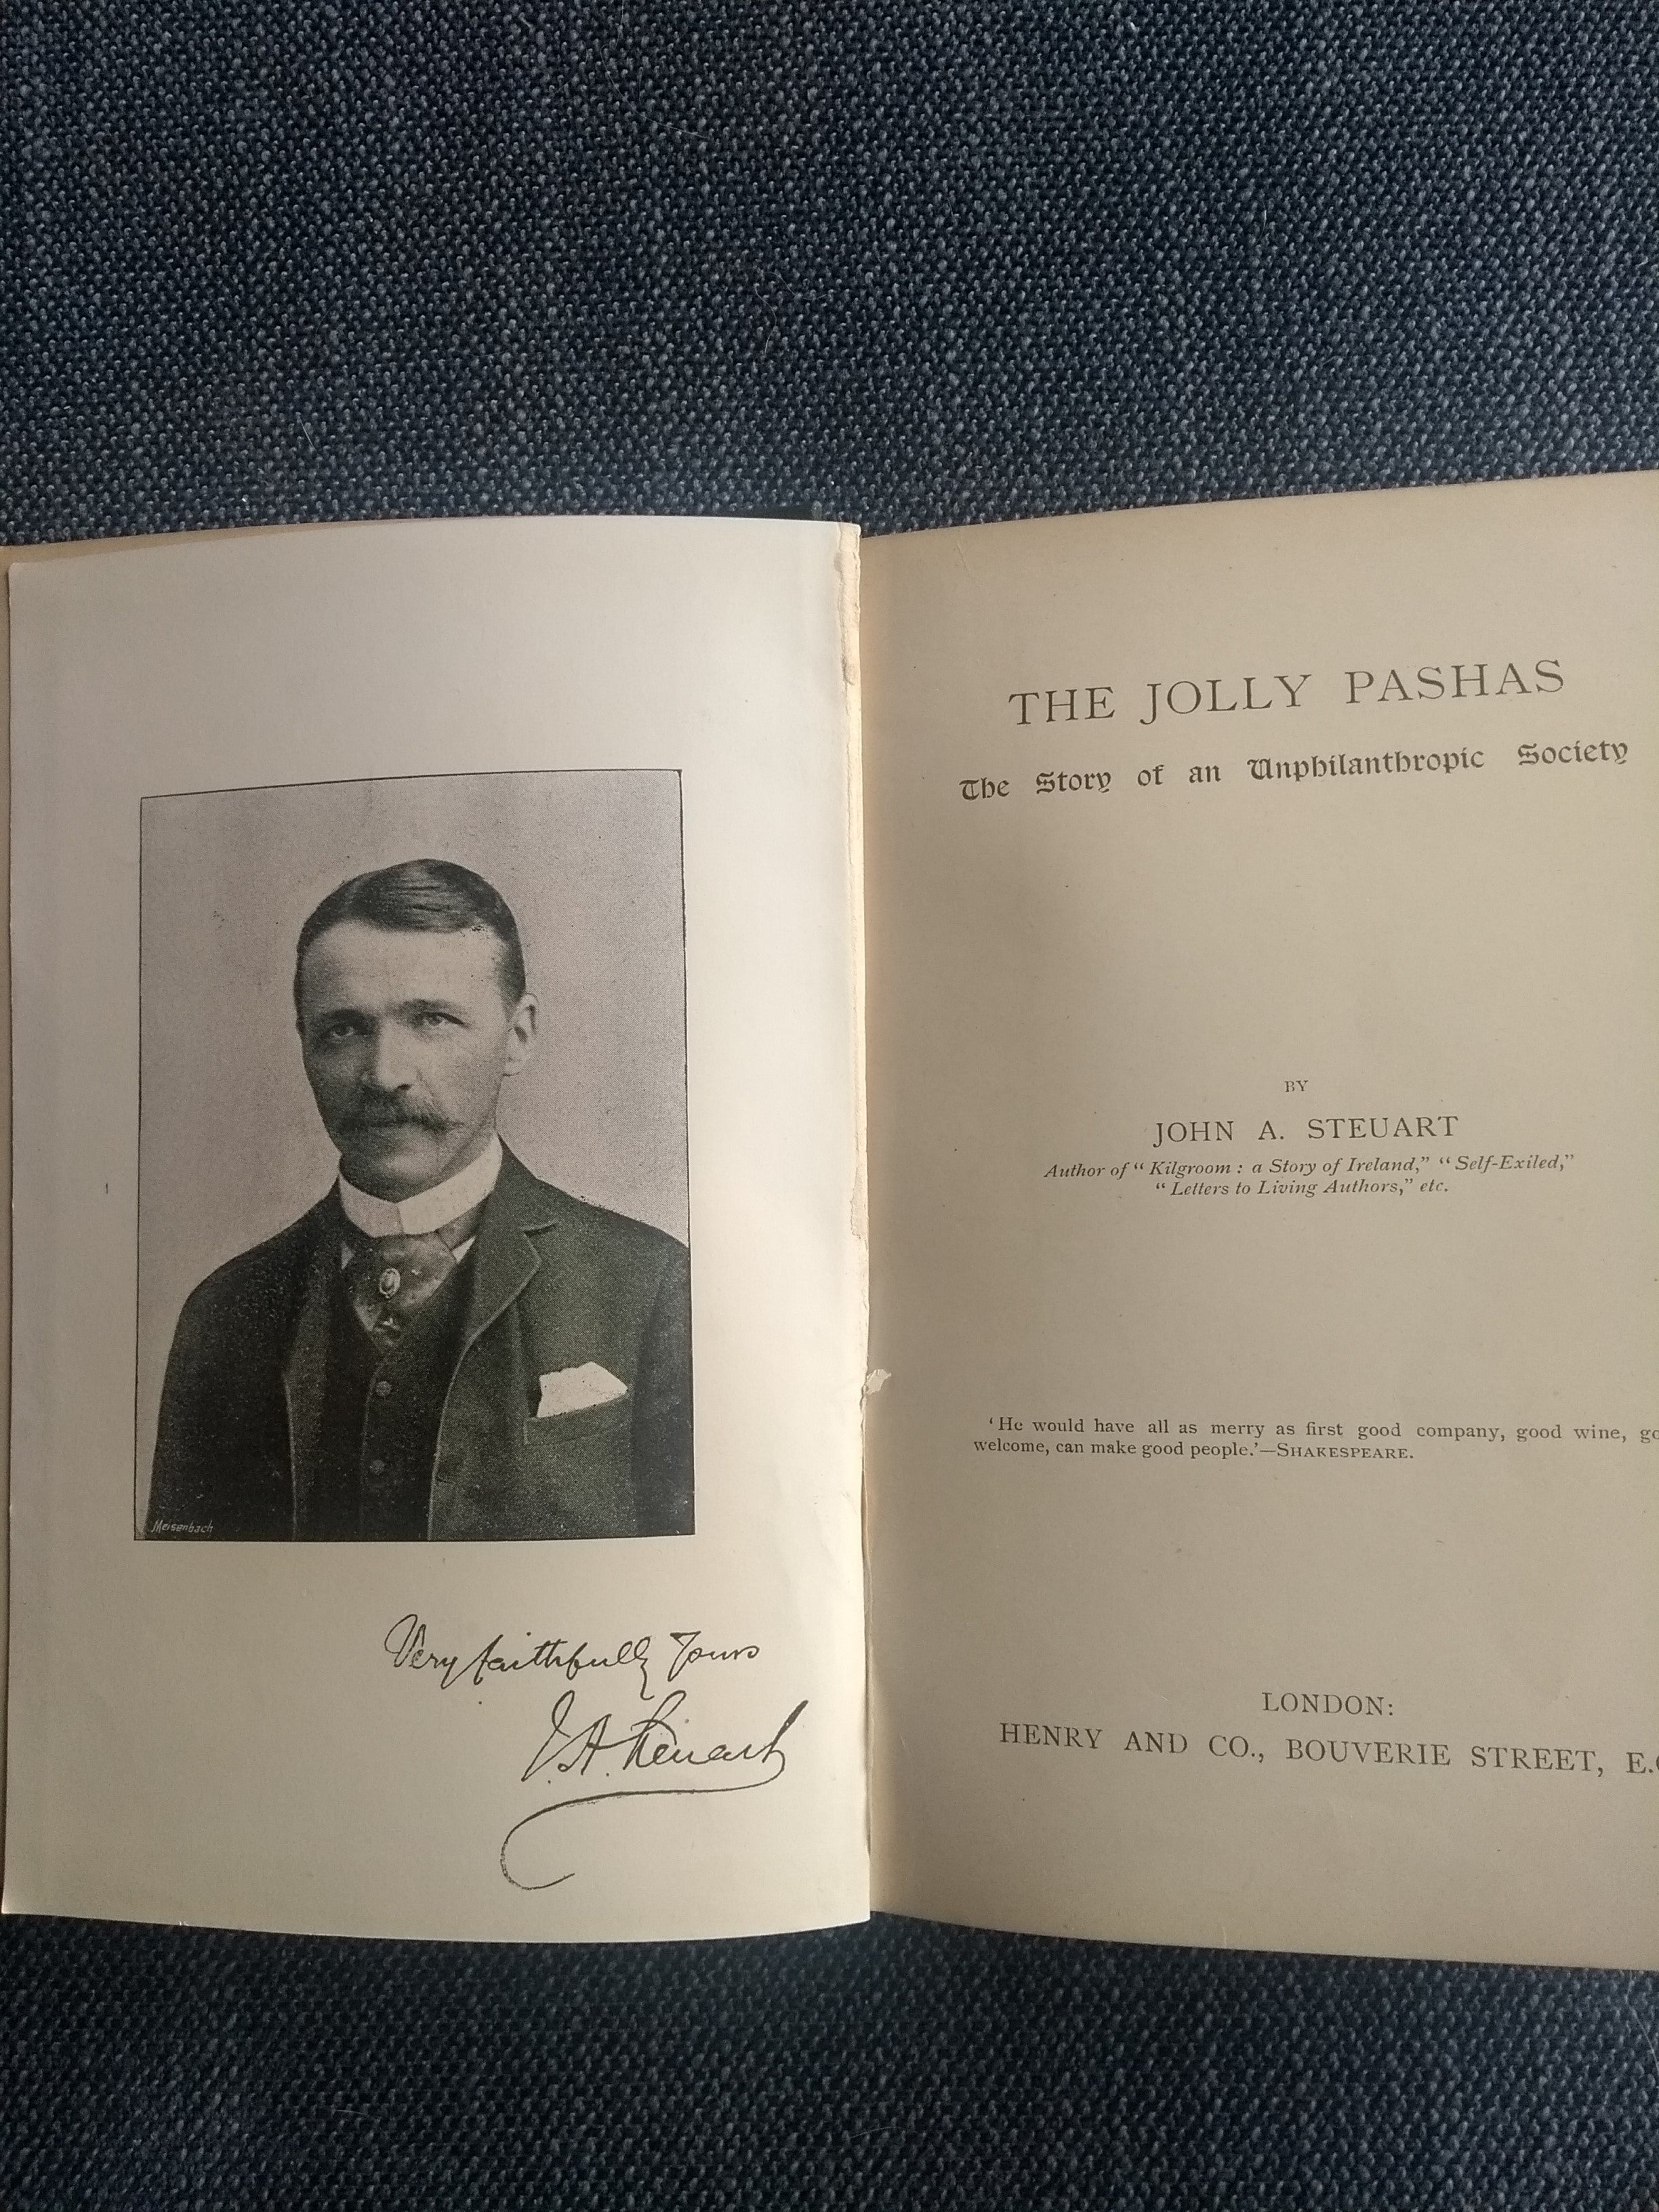 The Jolly Pashas: The Story of an Unphilanthropic Society, by John A Steuart,  [The Whitefriars Library of Wit and Humour: Edited by W. H. Davenport Adams]